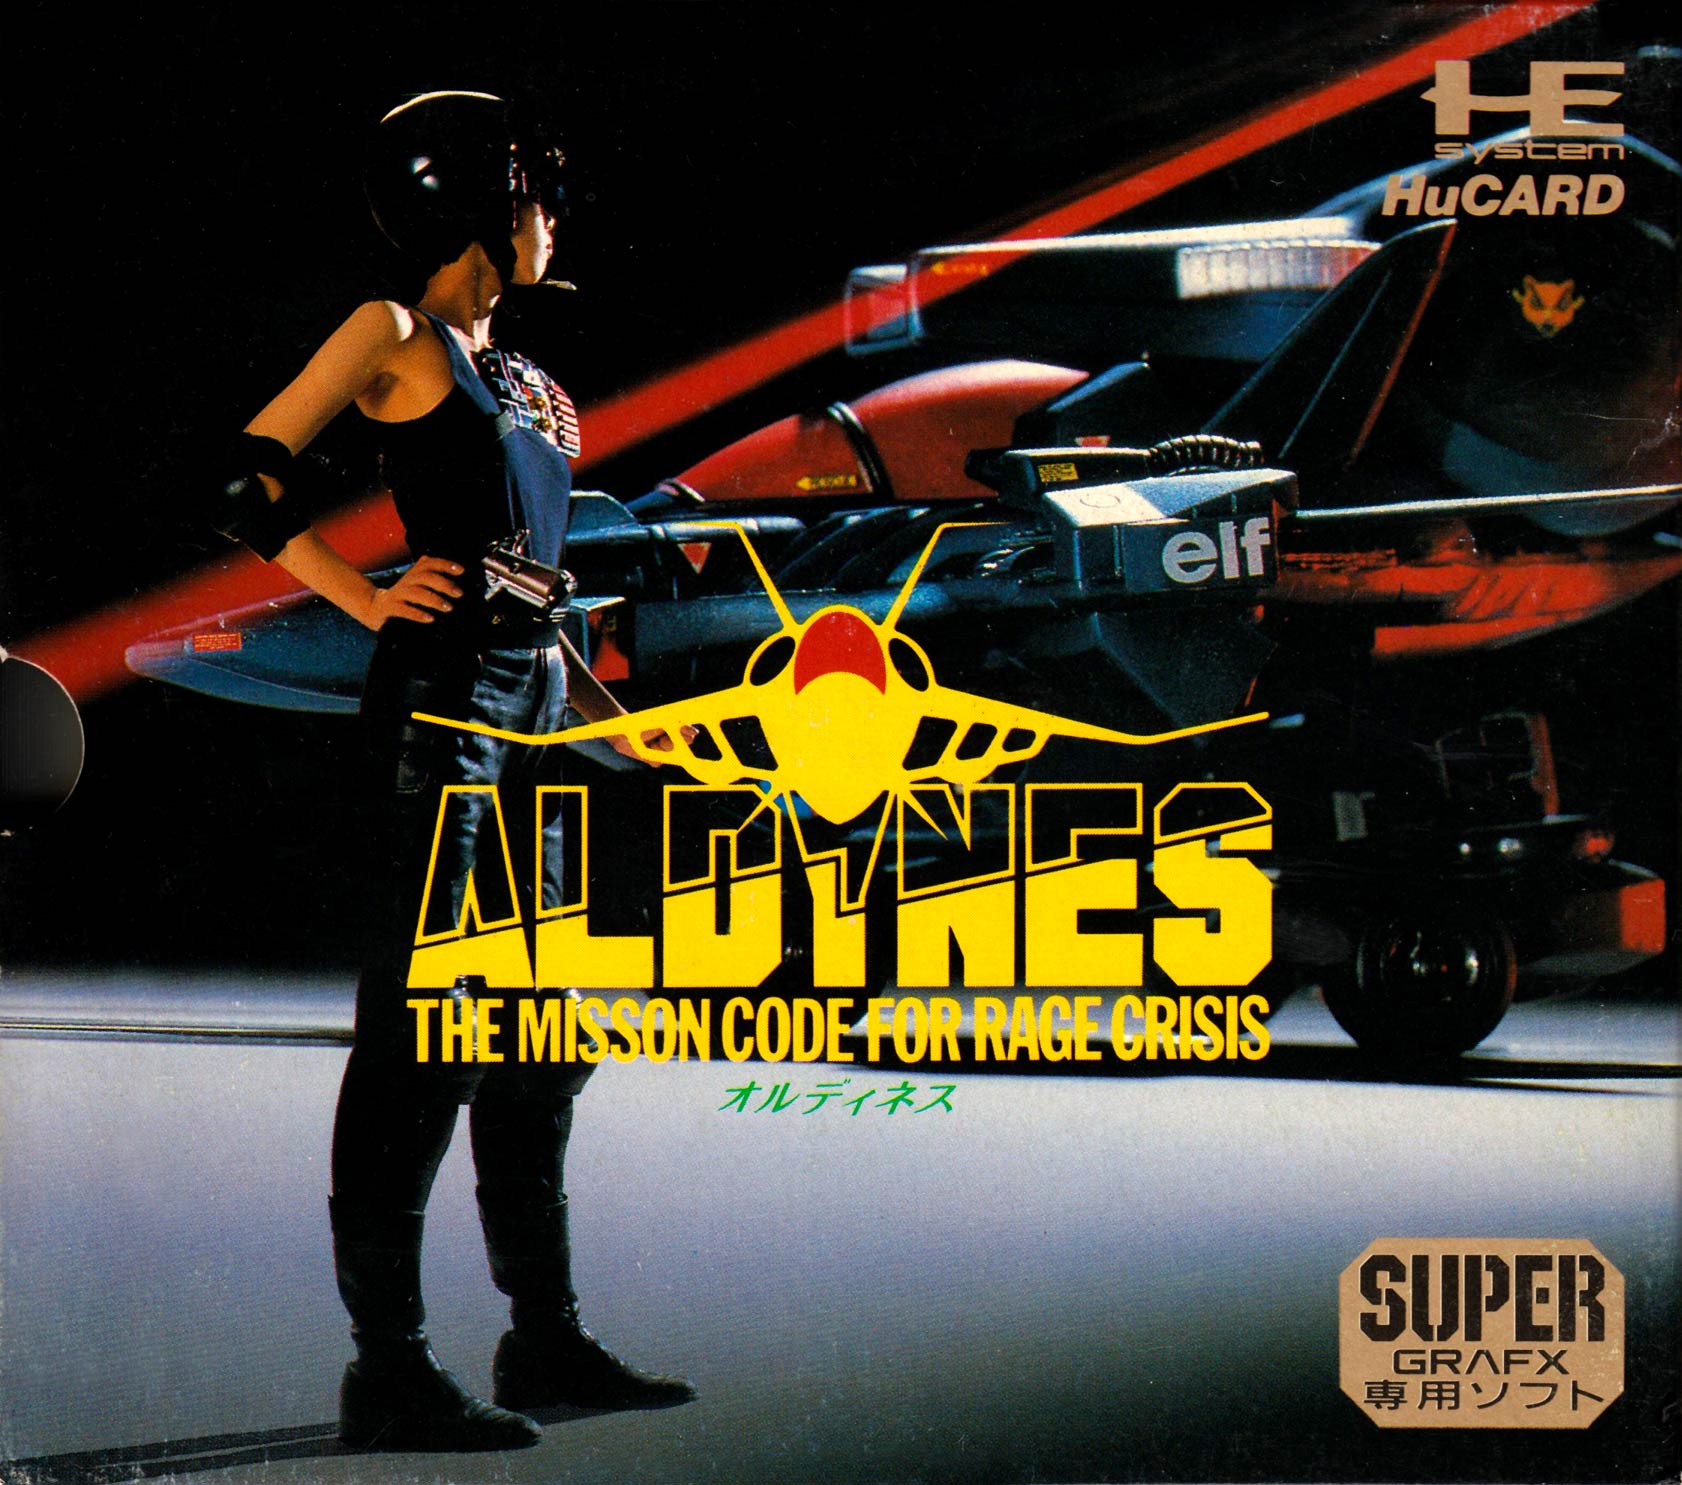 Aldynes - The PC Engine Software Bible